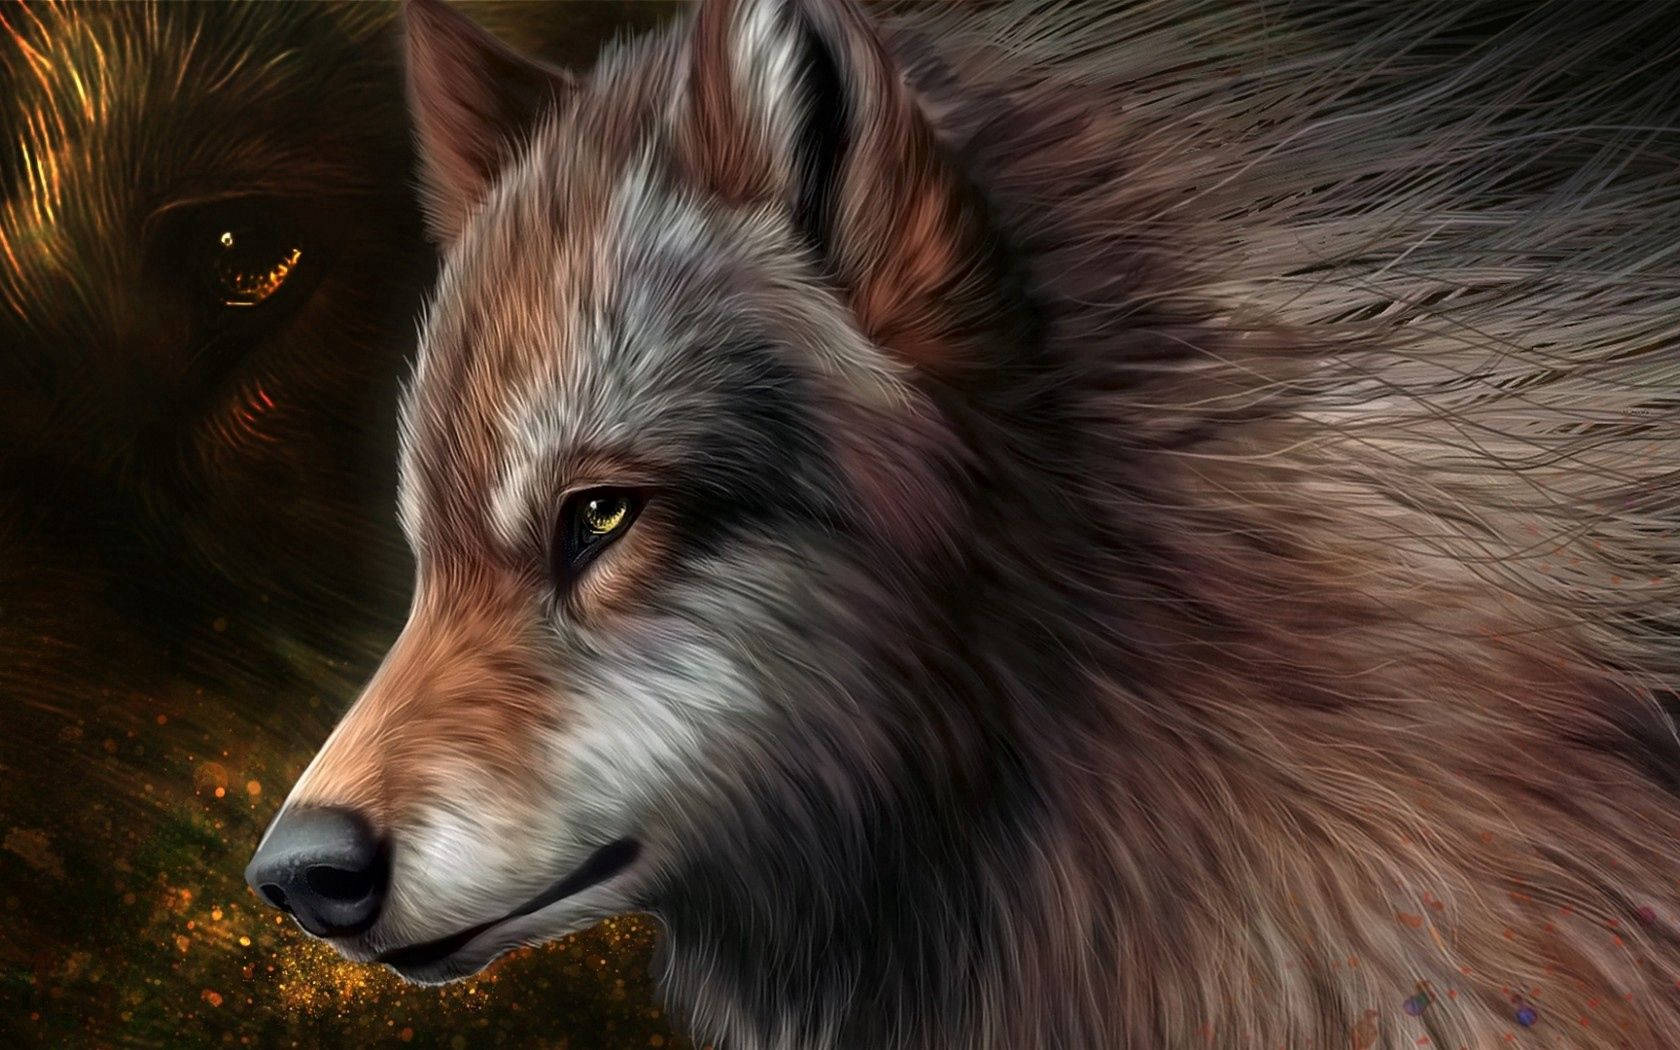 "The Grandeur of Nature: The Lone Wolf" Wallpaper